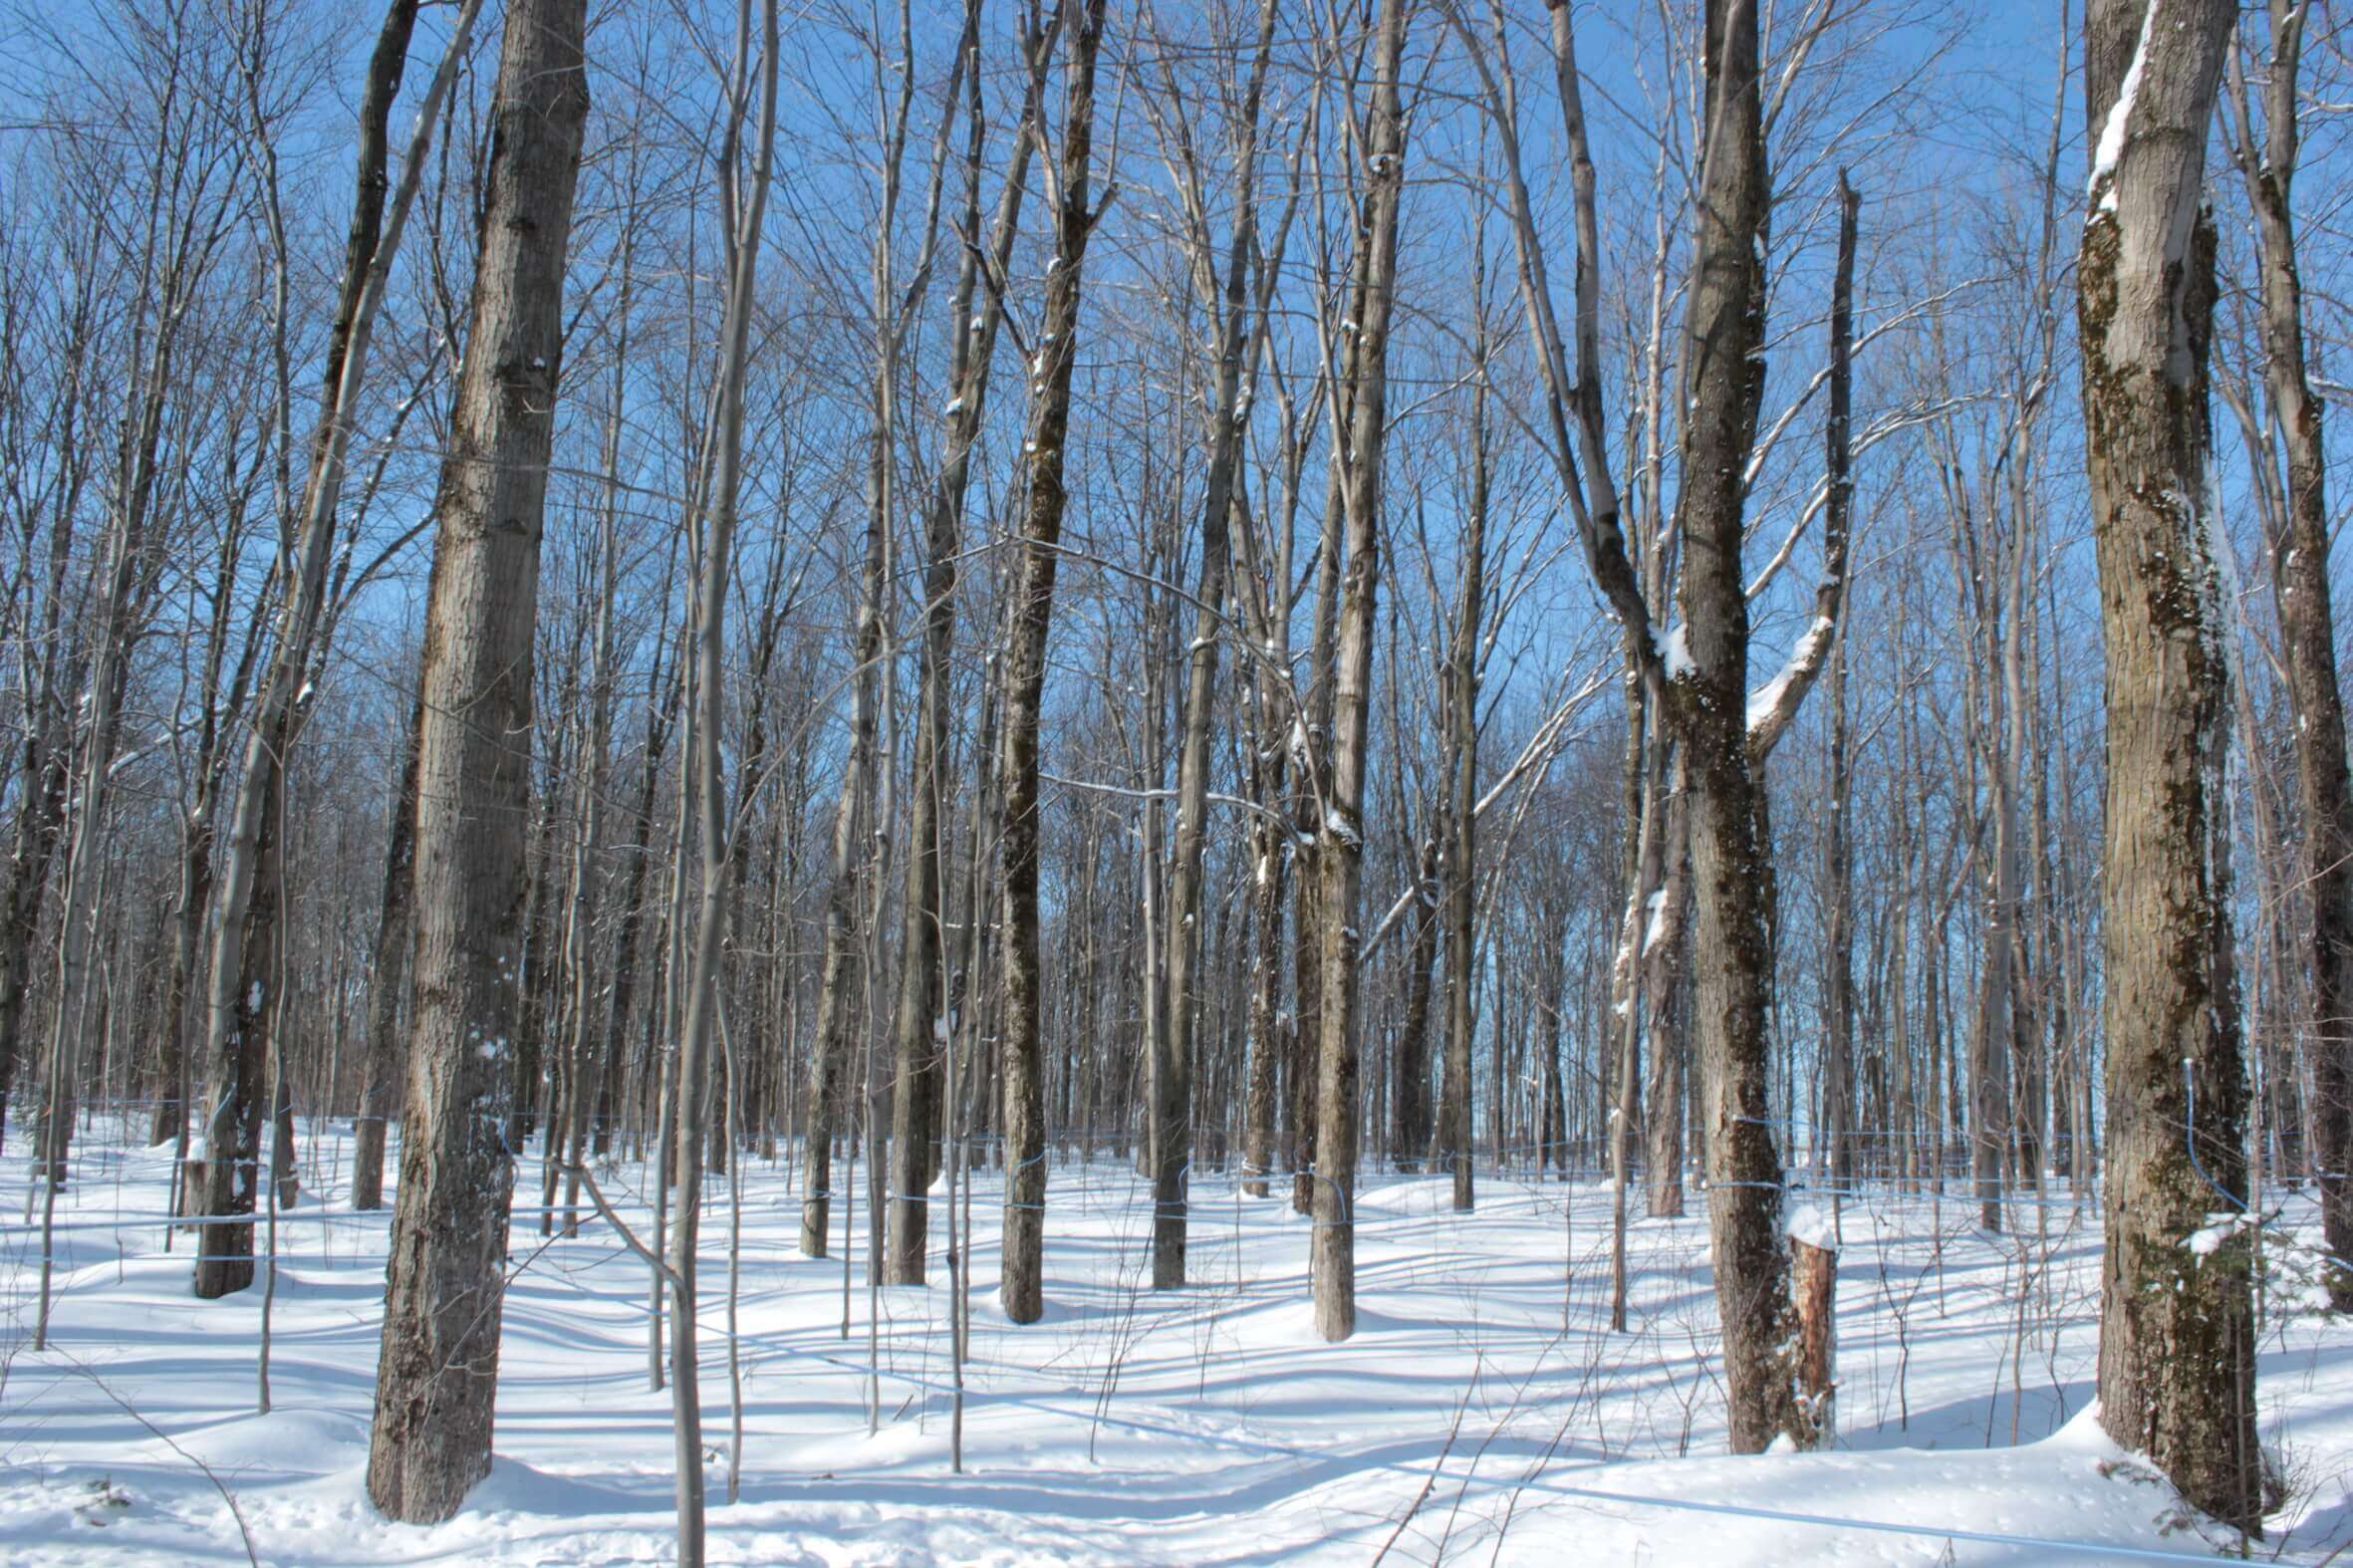 Qubec's maple forests provide cleaner air and have positive impact on climate besides providing maple